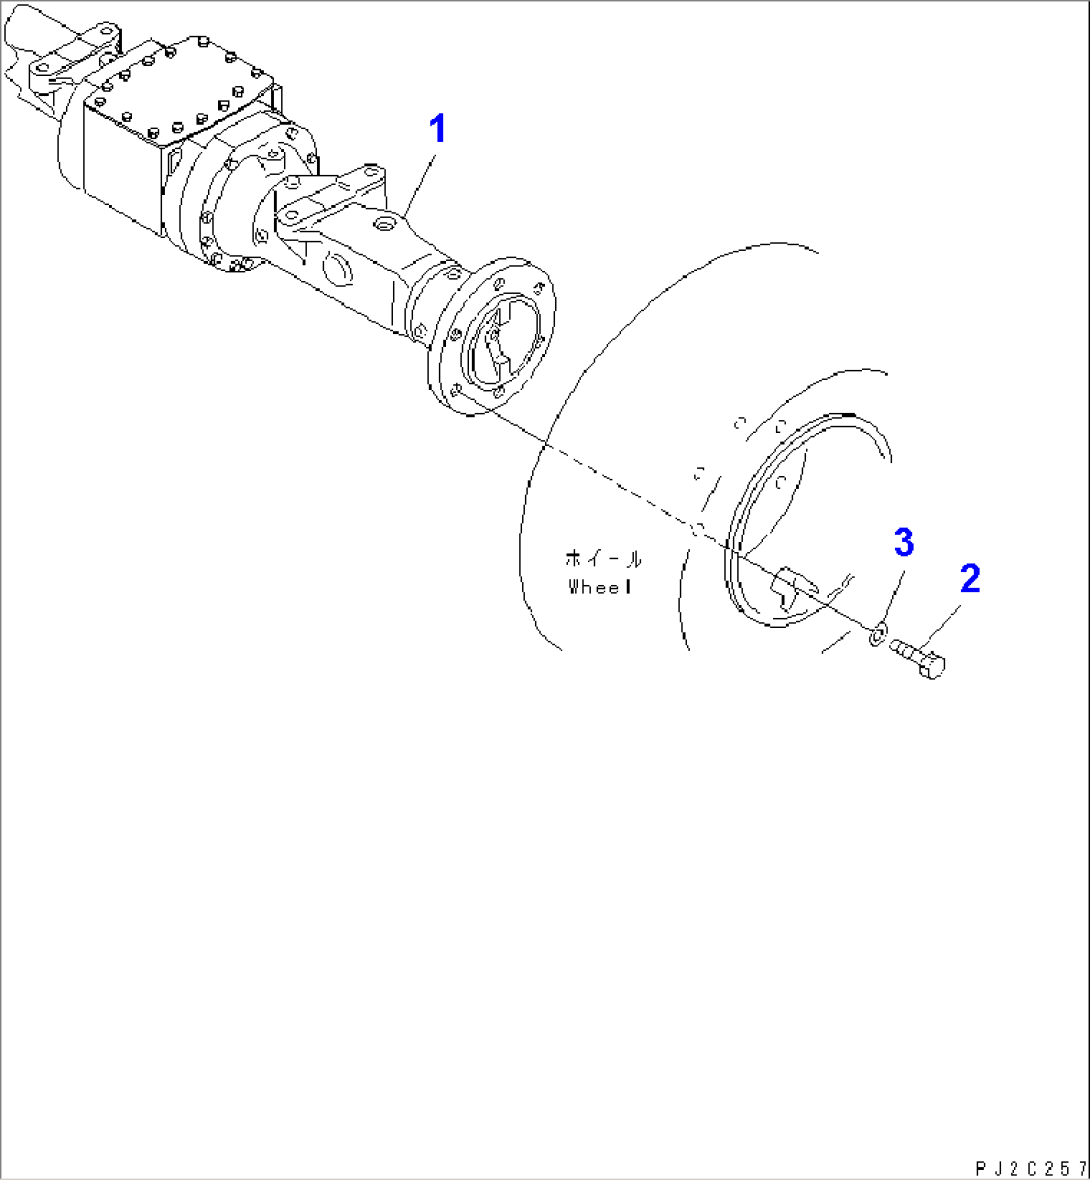 FRONT AXLE AND WHEEL MUNTING PARTS